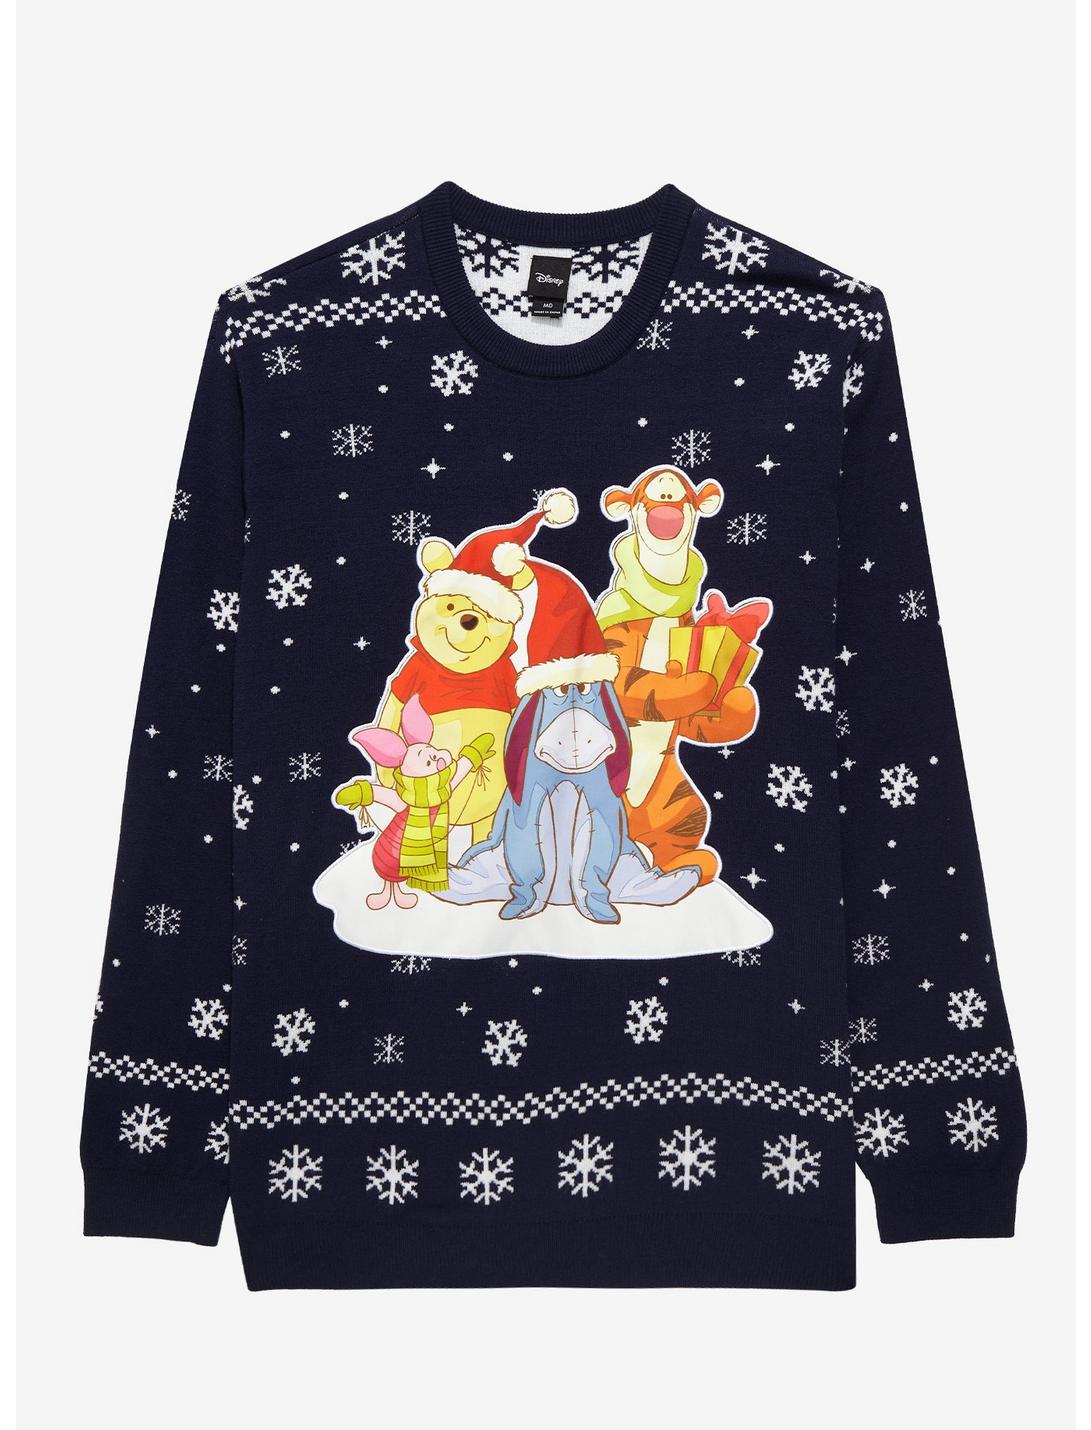 Disney Winnie the Pooh Pooh & Friends Holiday Sweater, NAVY, hi-res